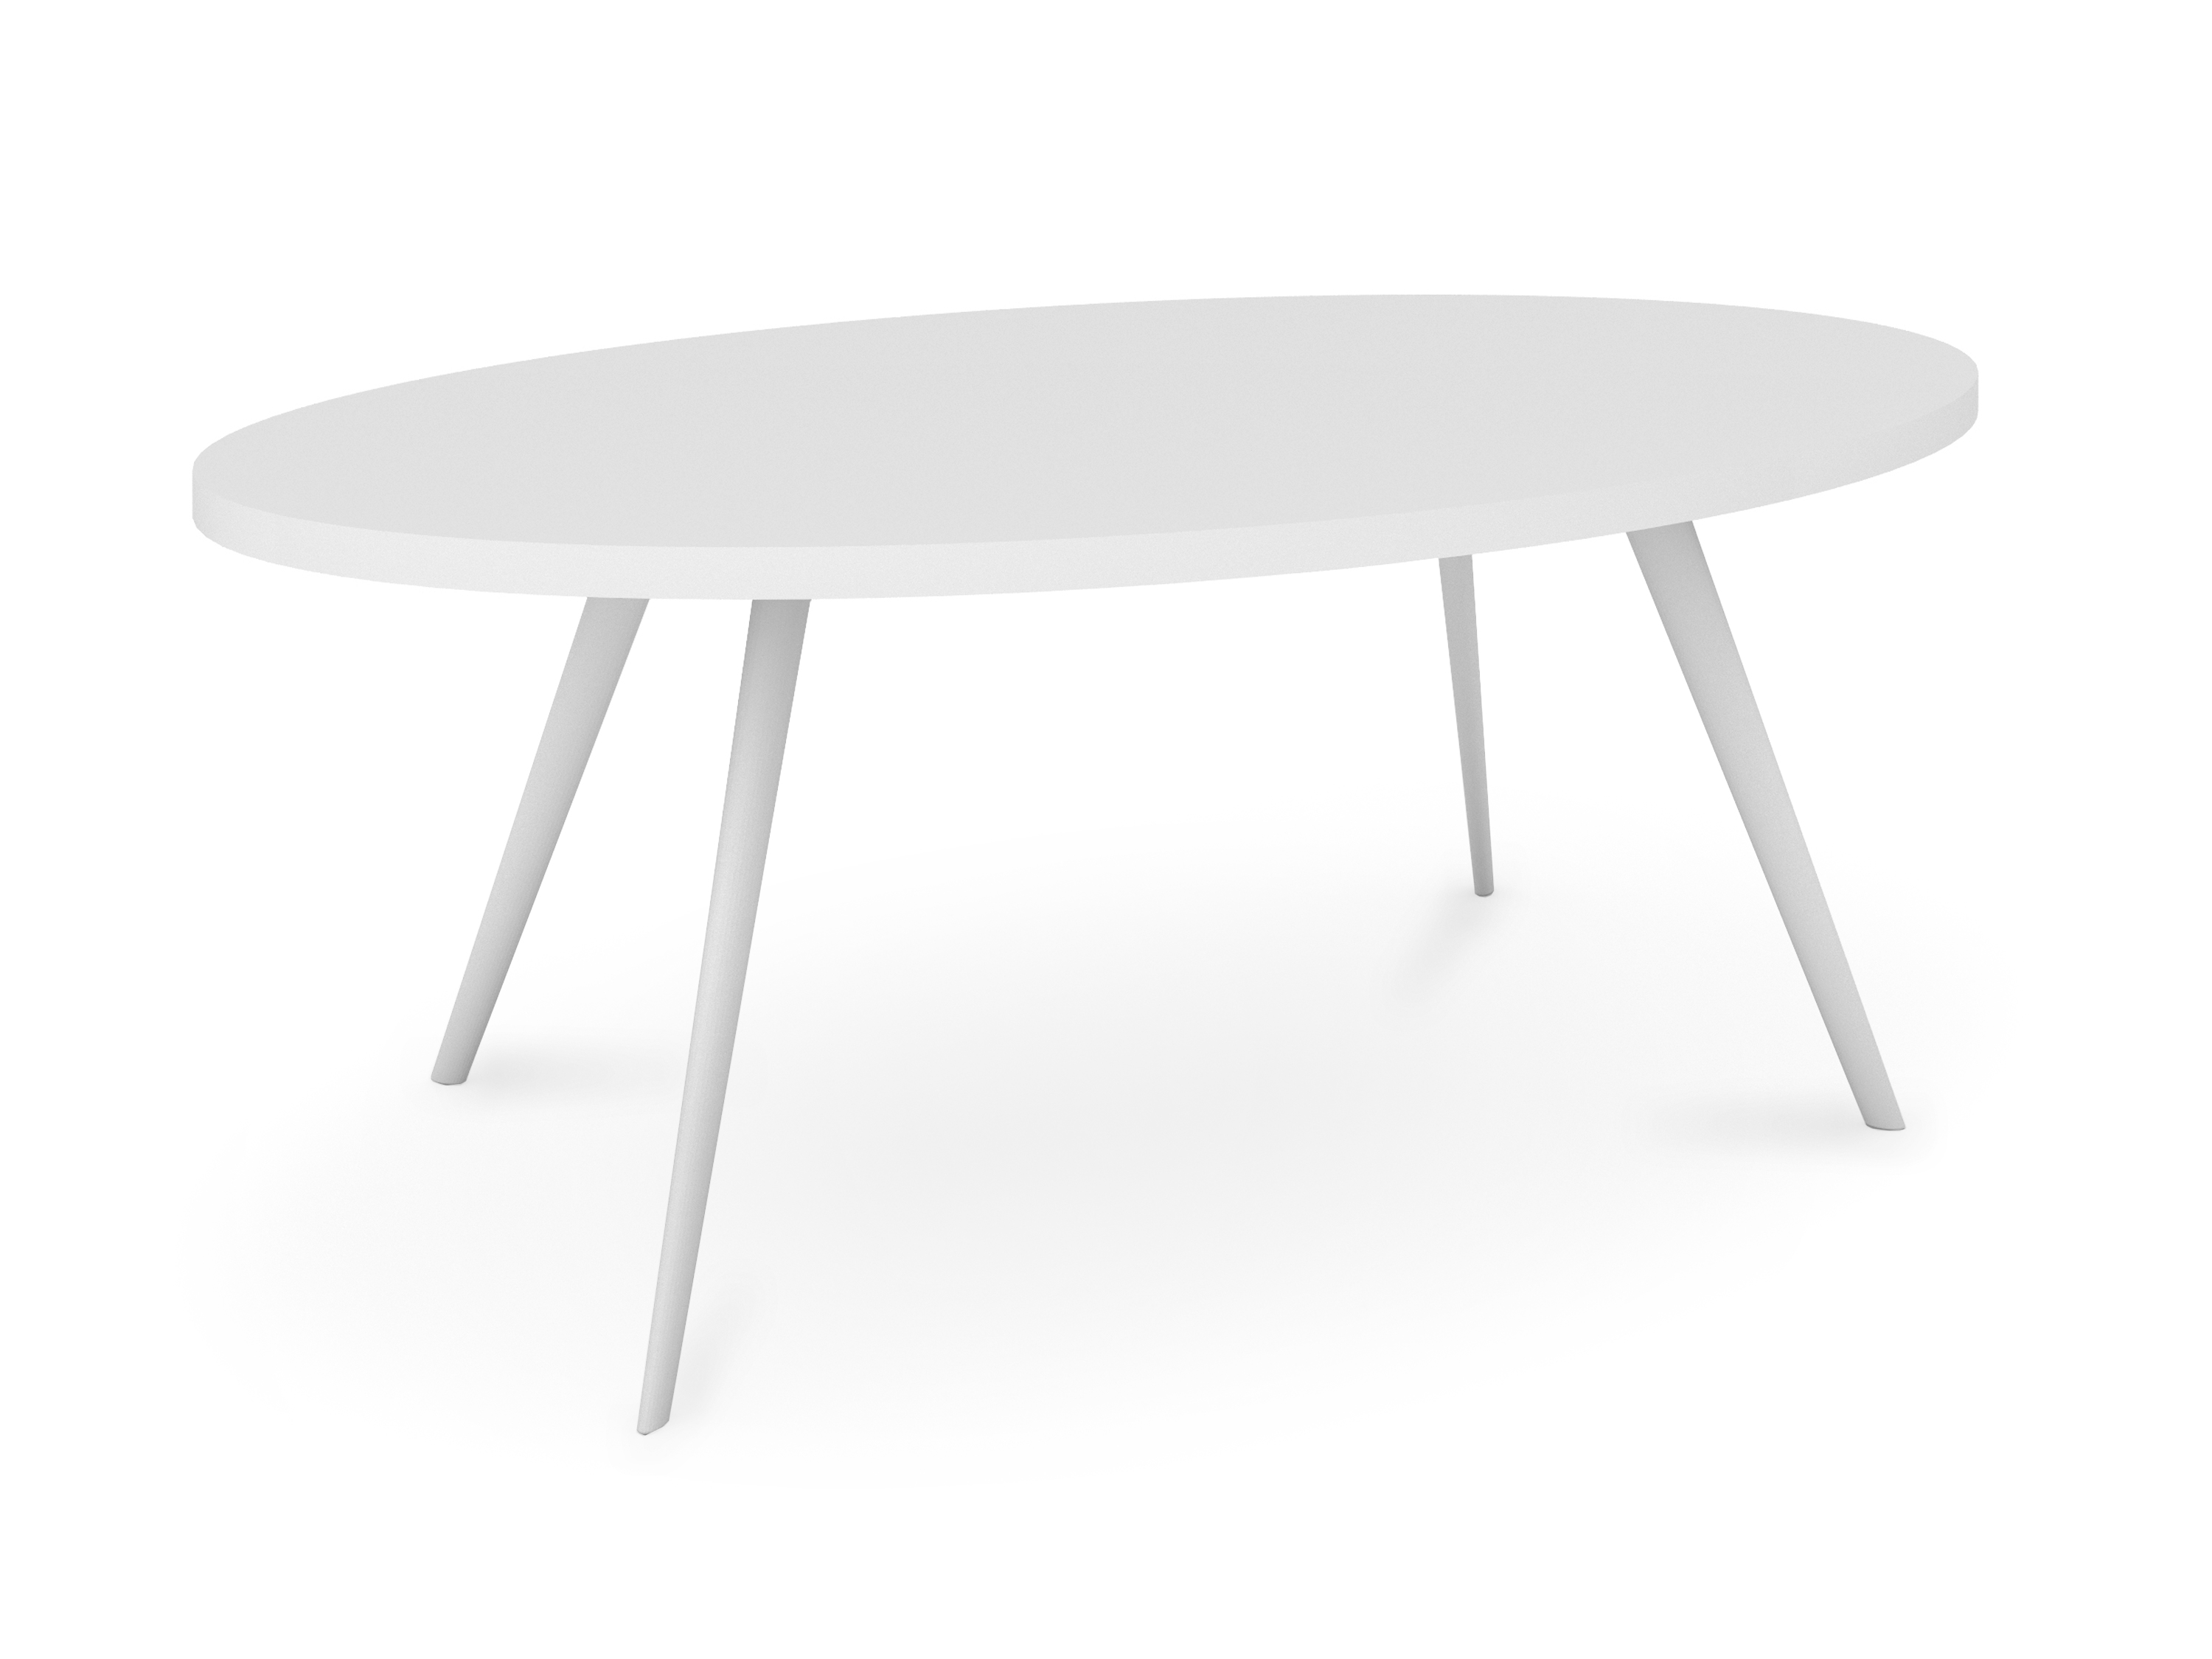 WS - Air coffee table - Oval - All white